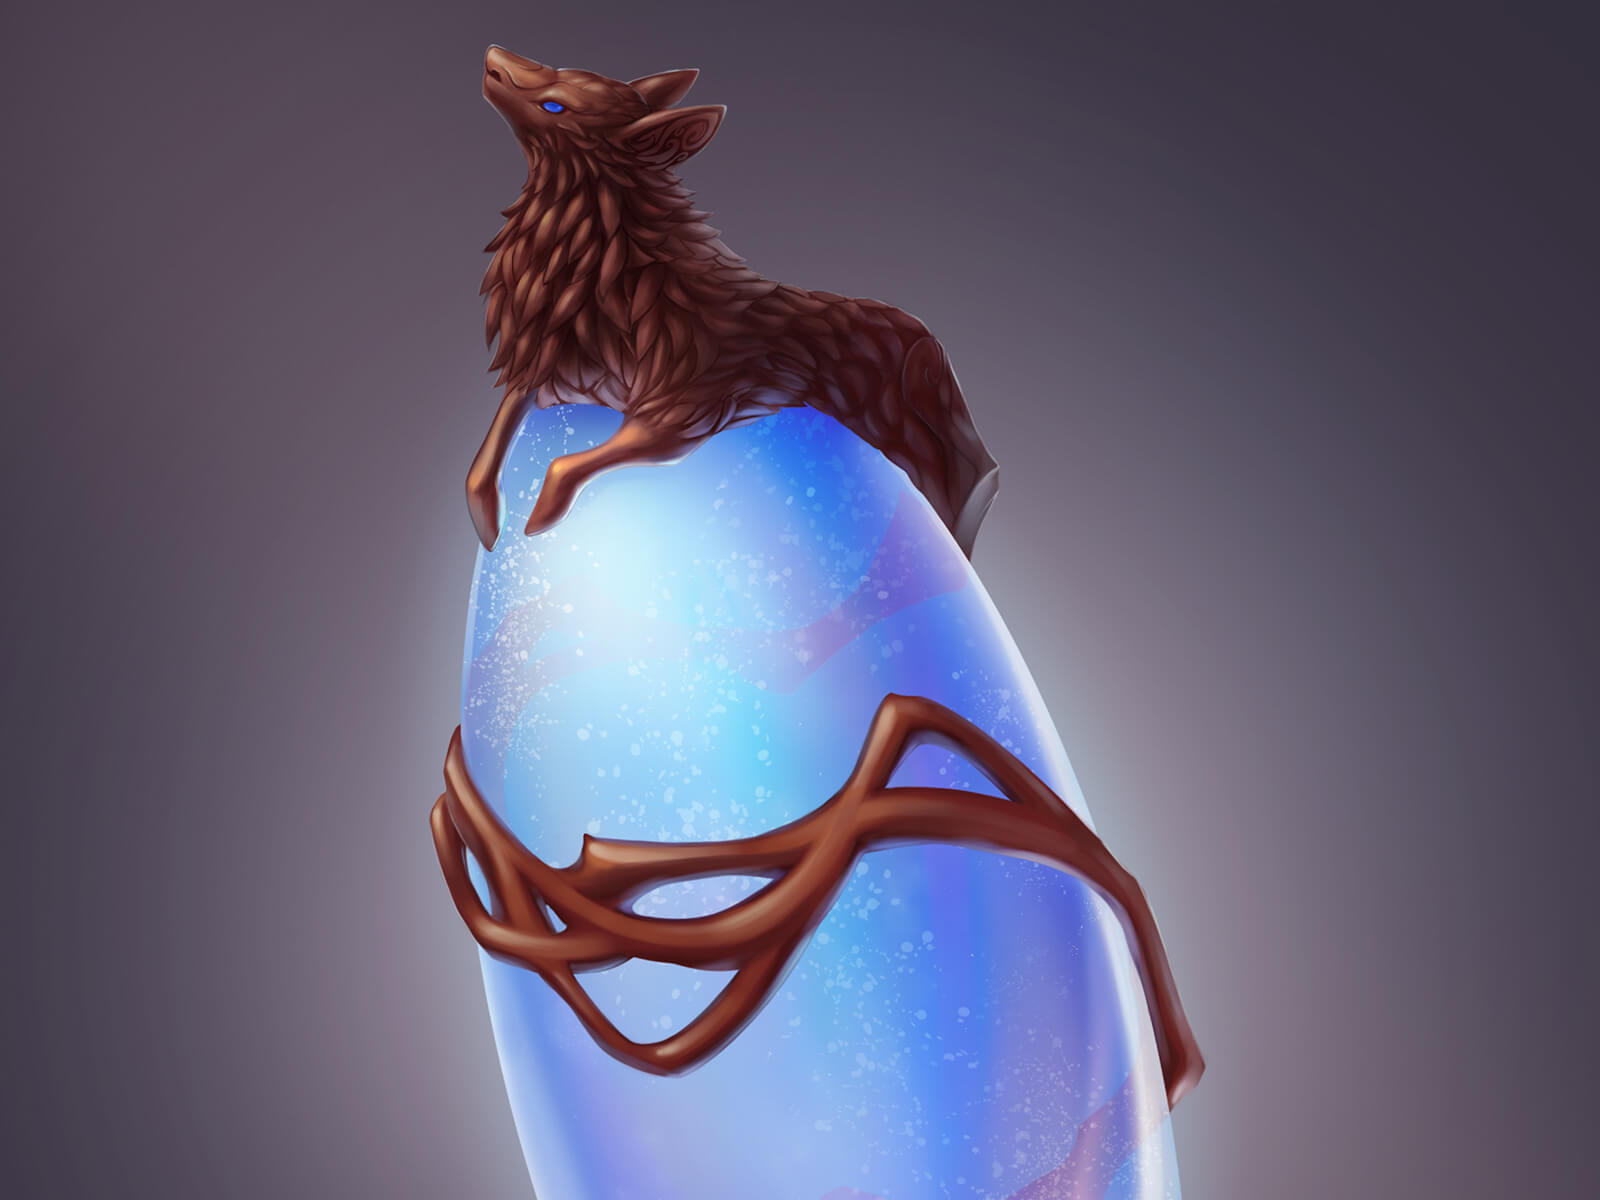 A translucent blue, egg-shaped gem enveloped by a brown lamb-like figure elongated to wrap around the gem's entirety.